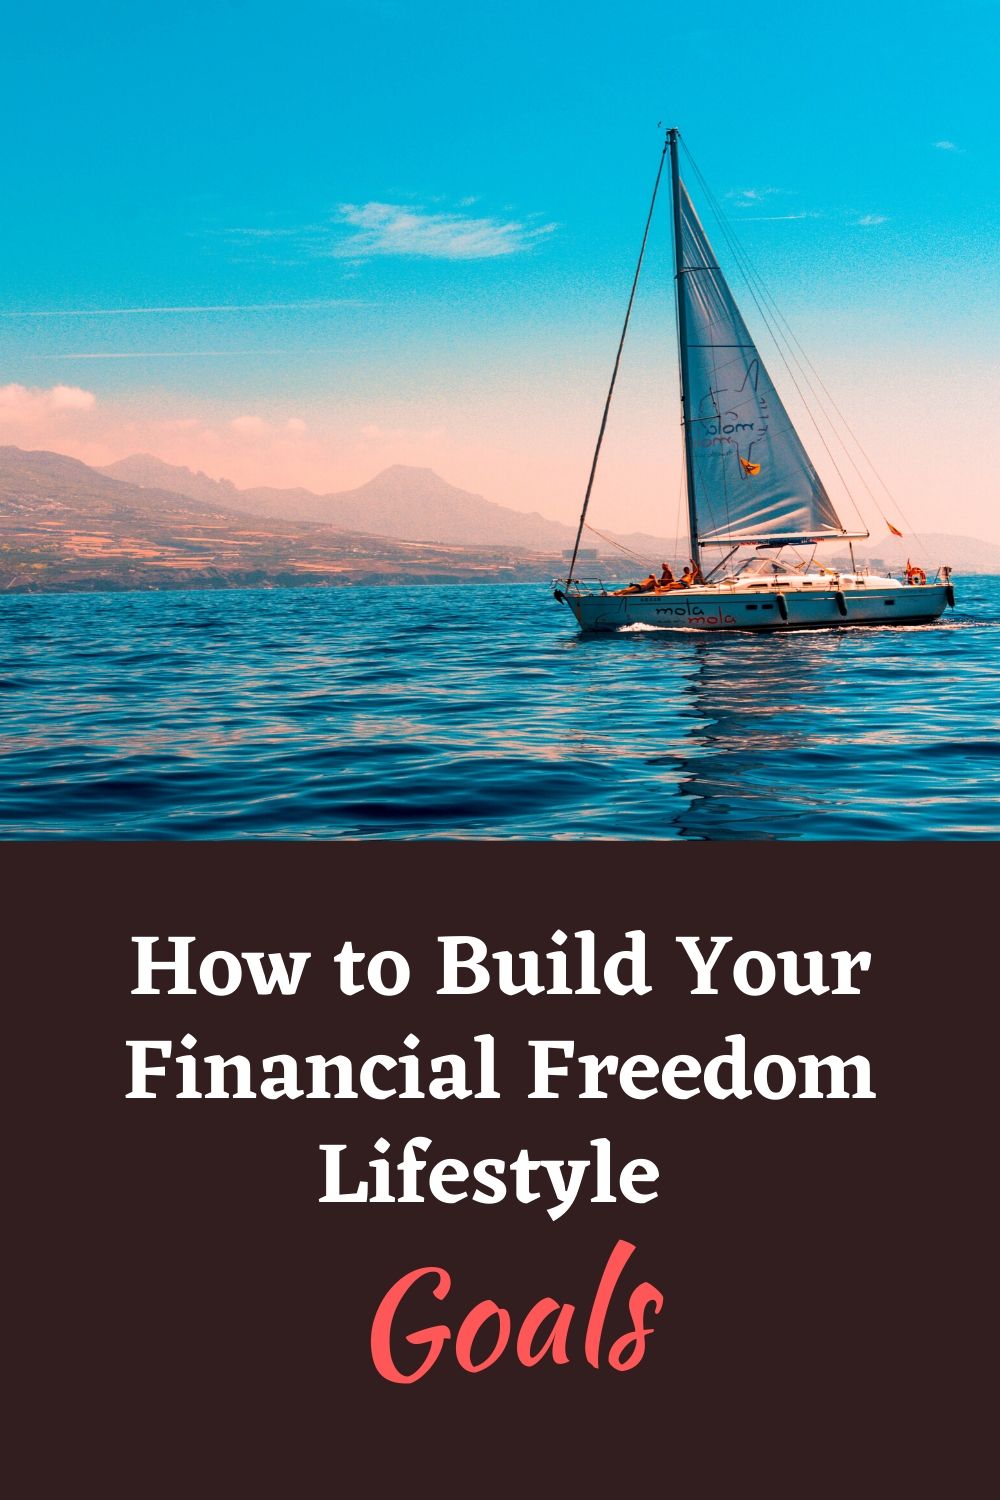 How to Build Your Financial Freedom Lifestyle Goals